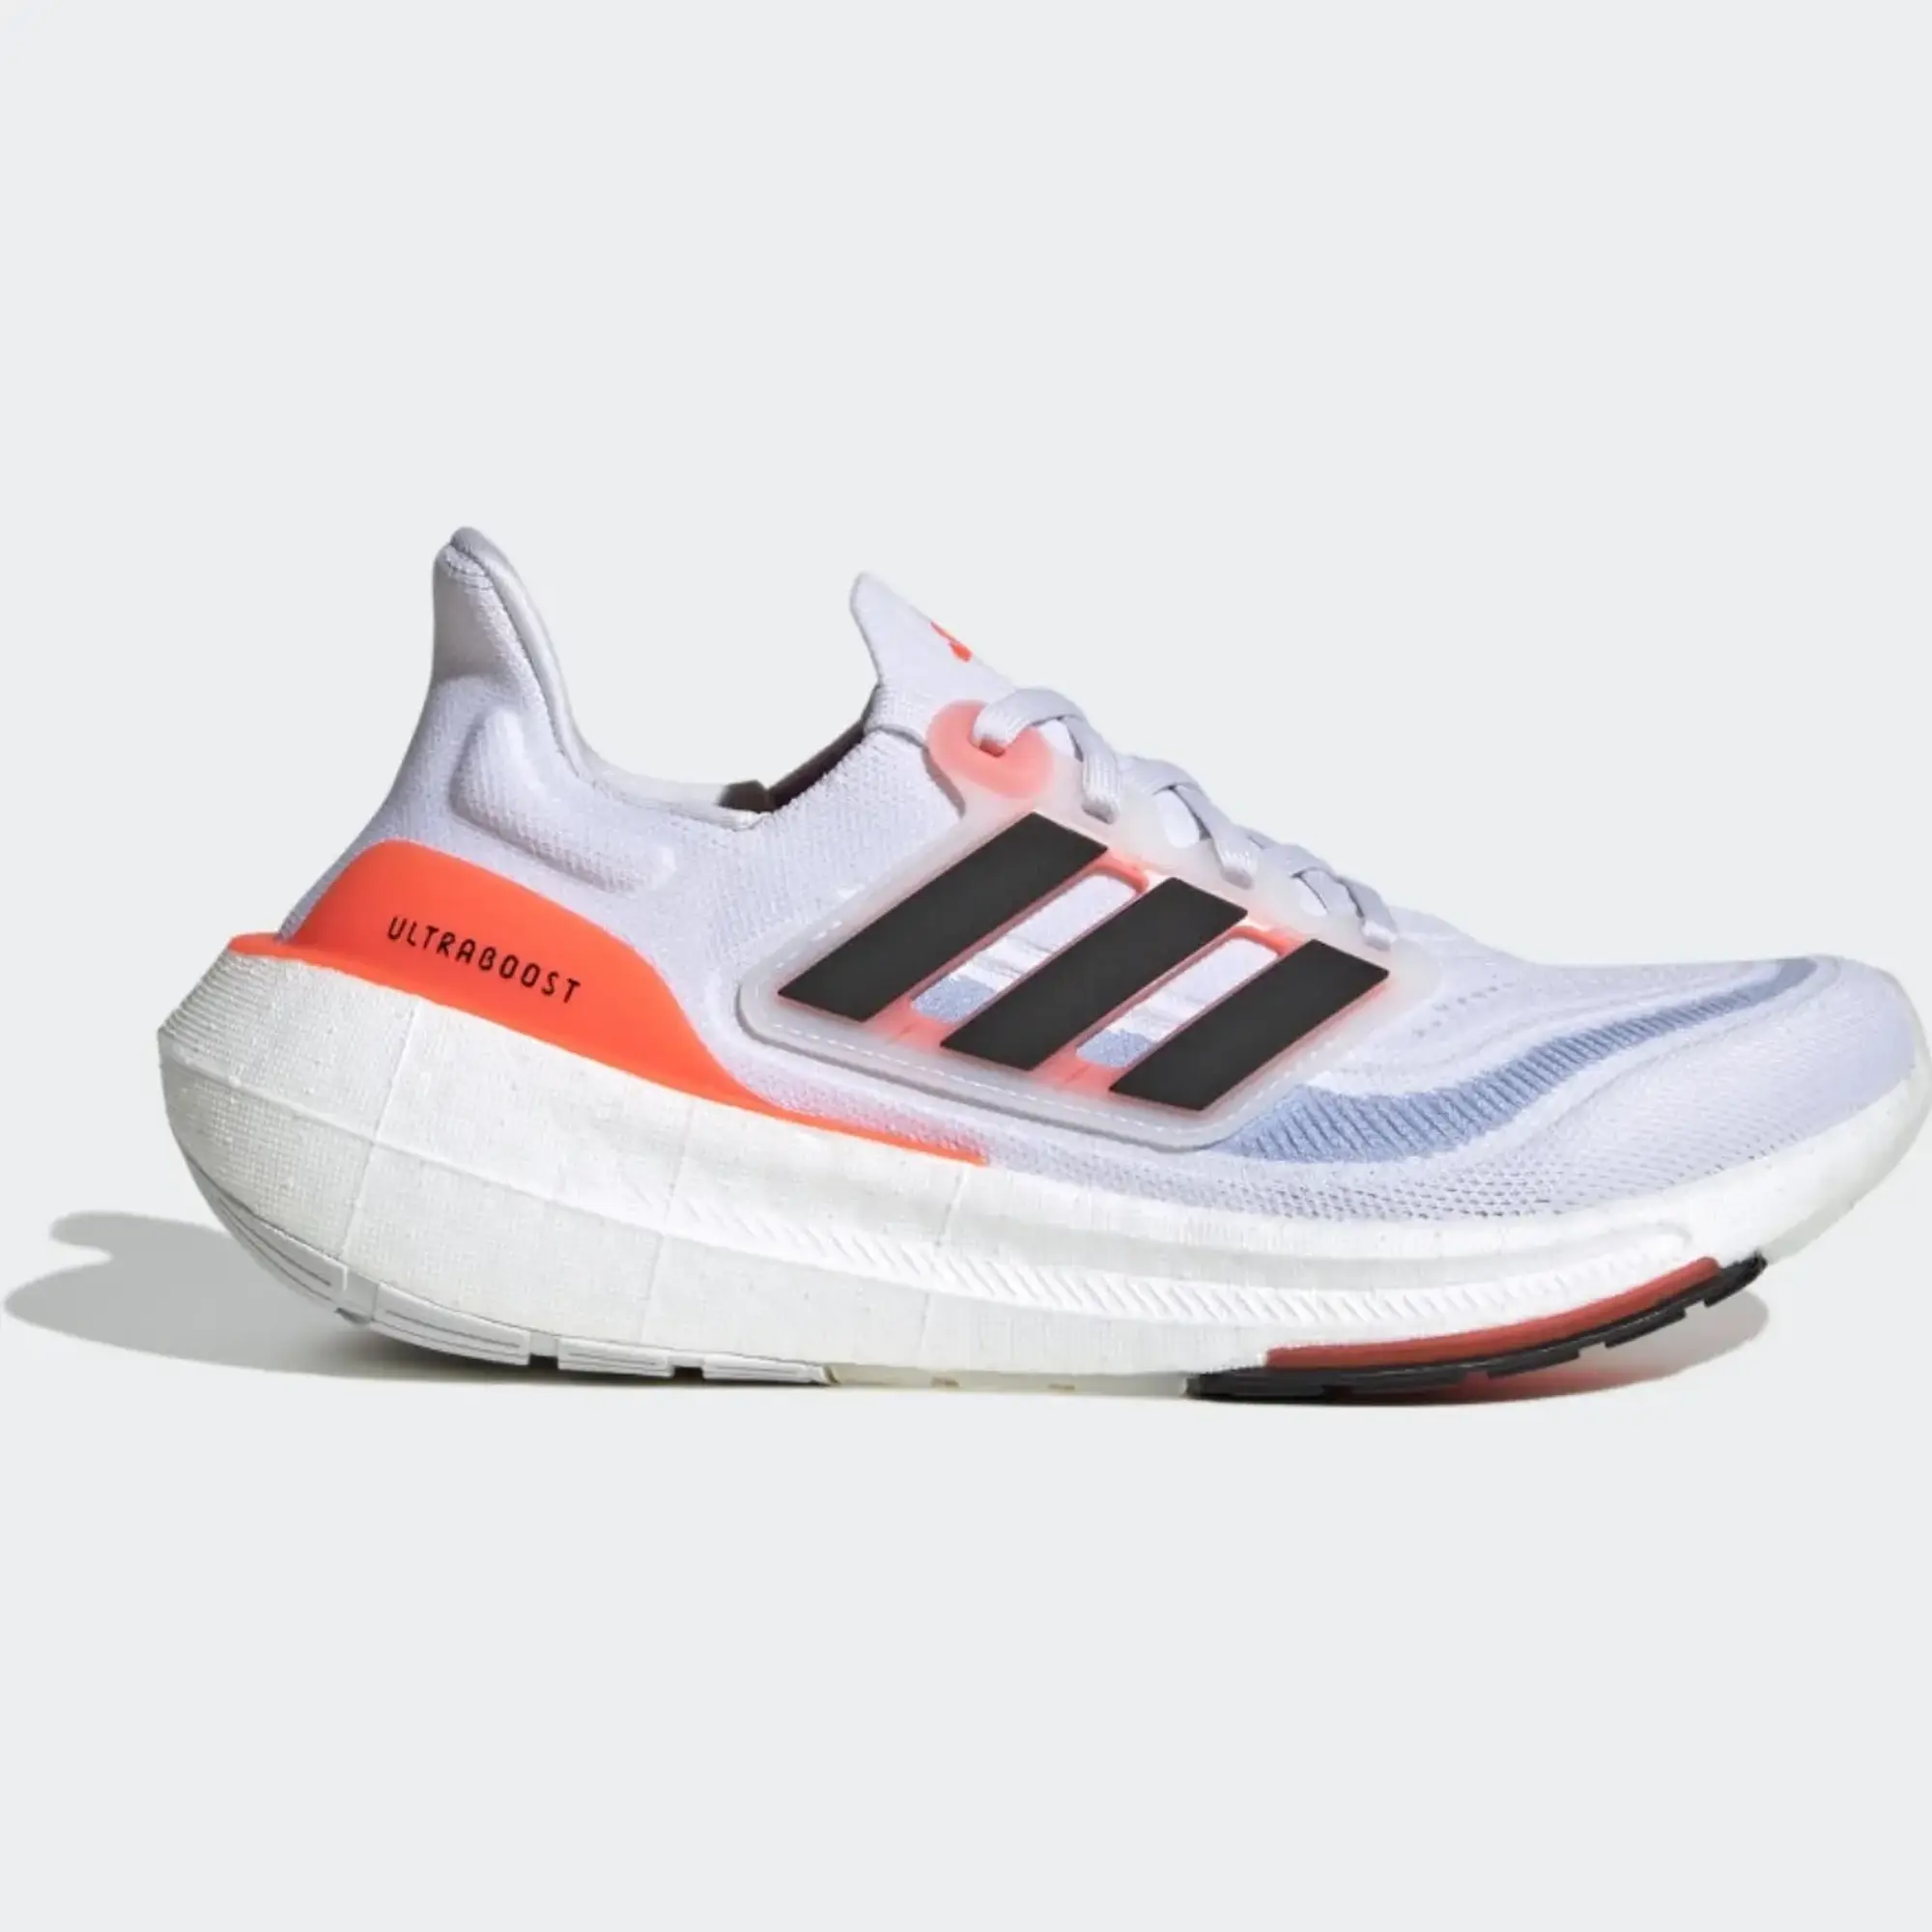 Adidas Running Ultraboost Light Trainers In White And Orange